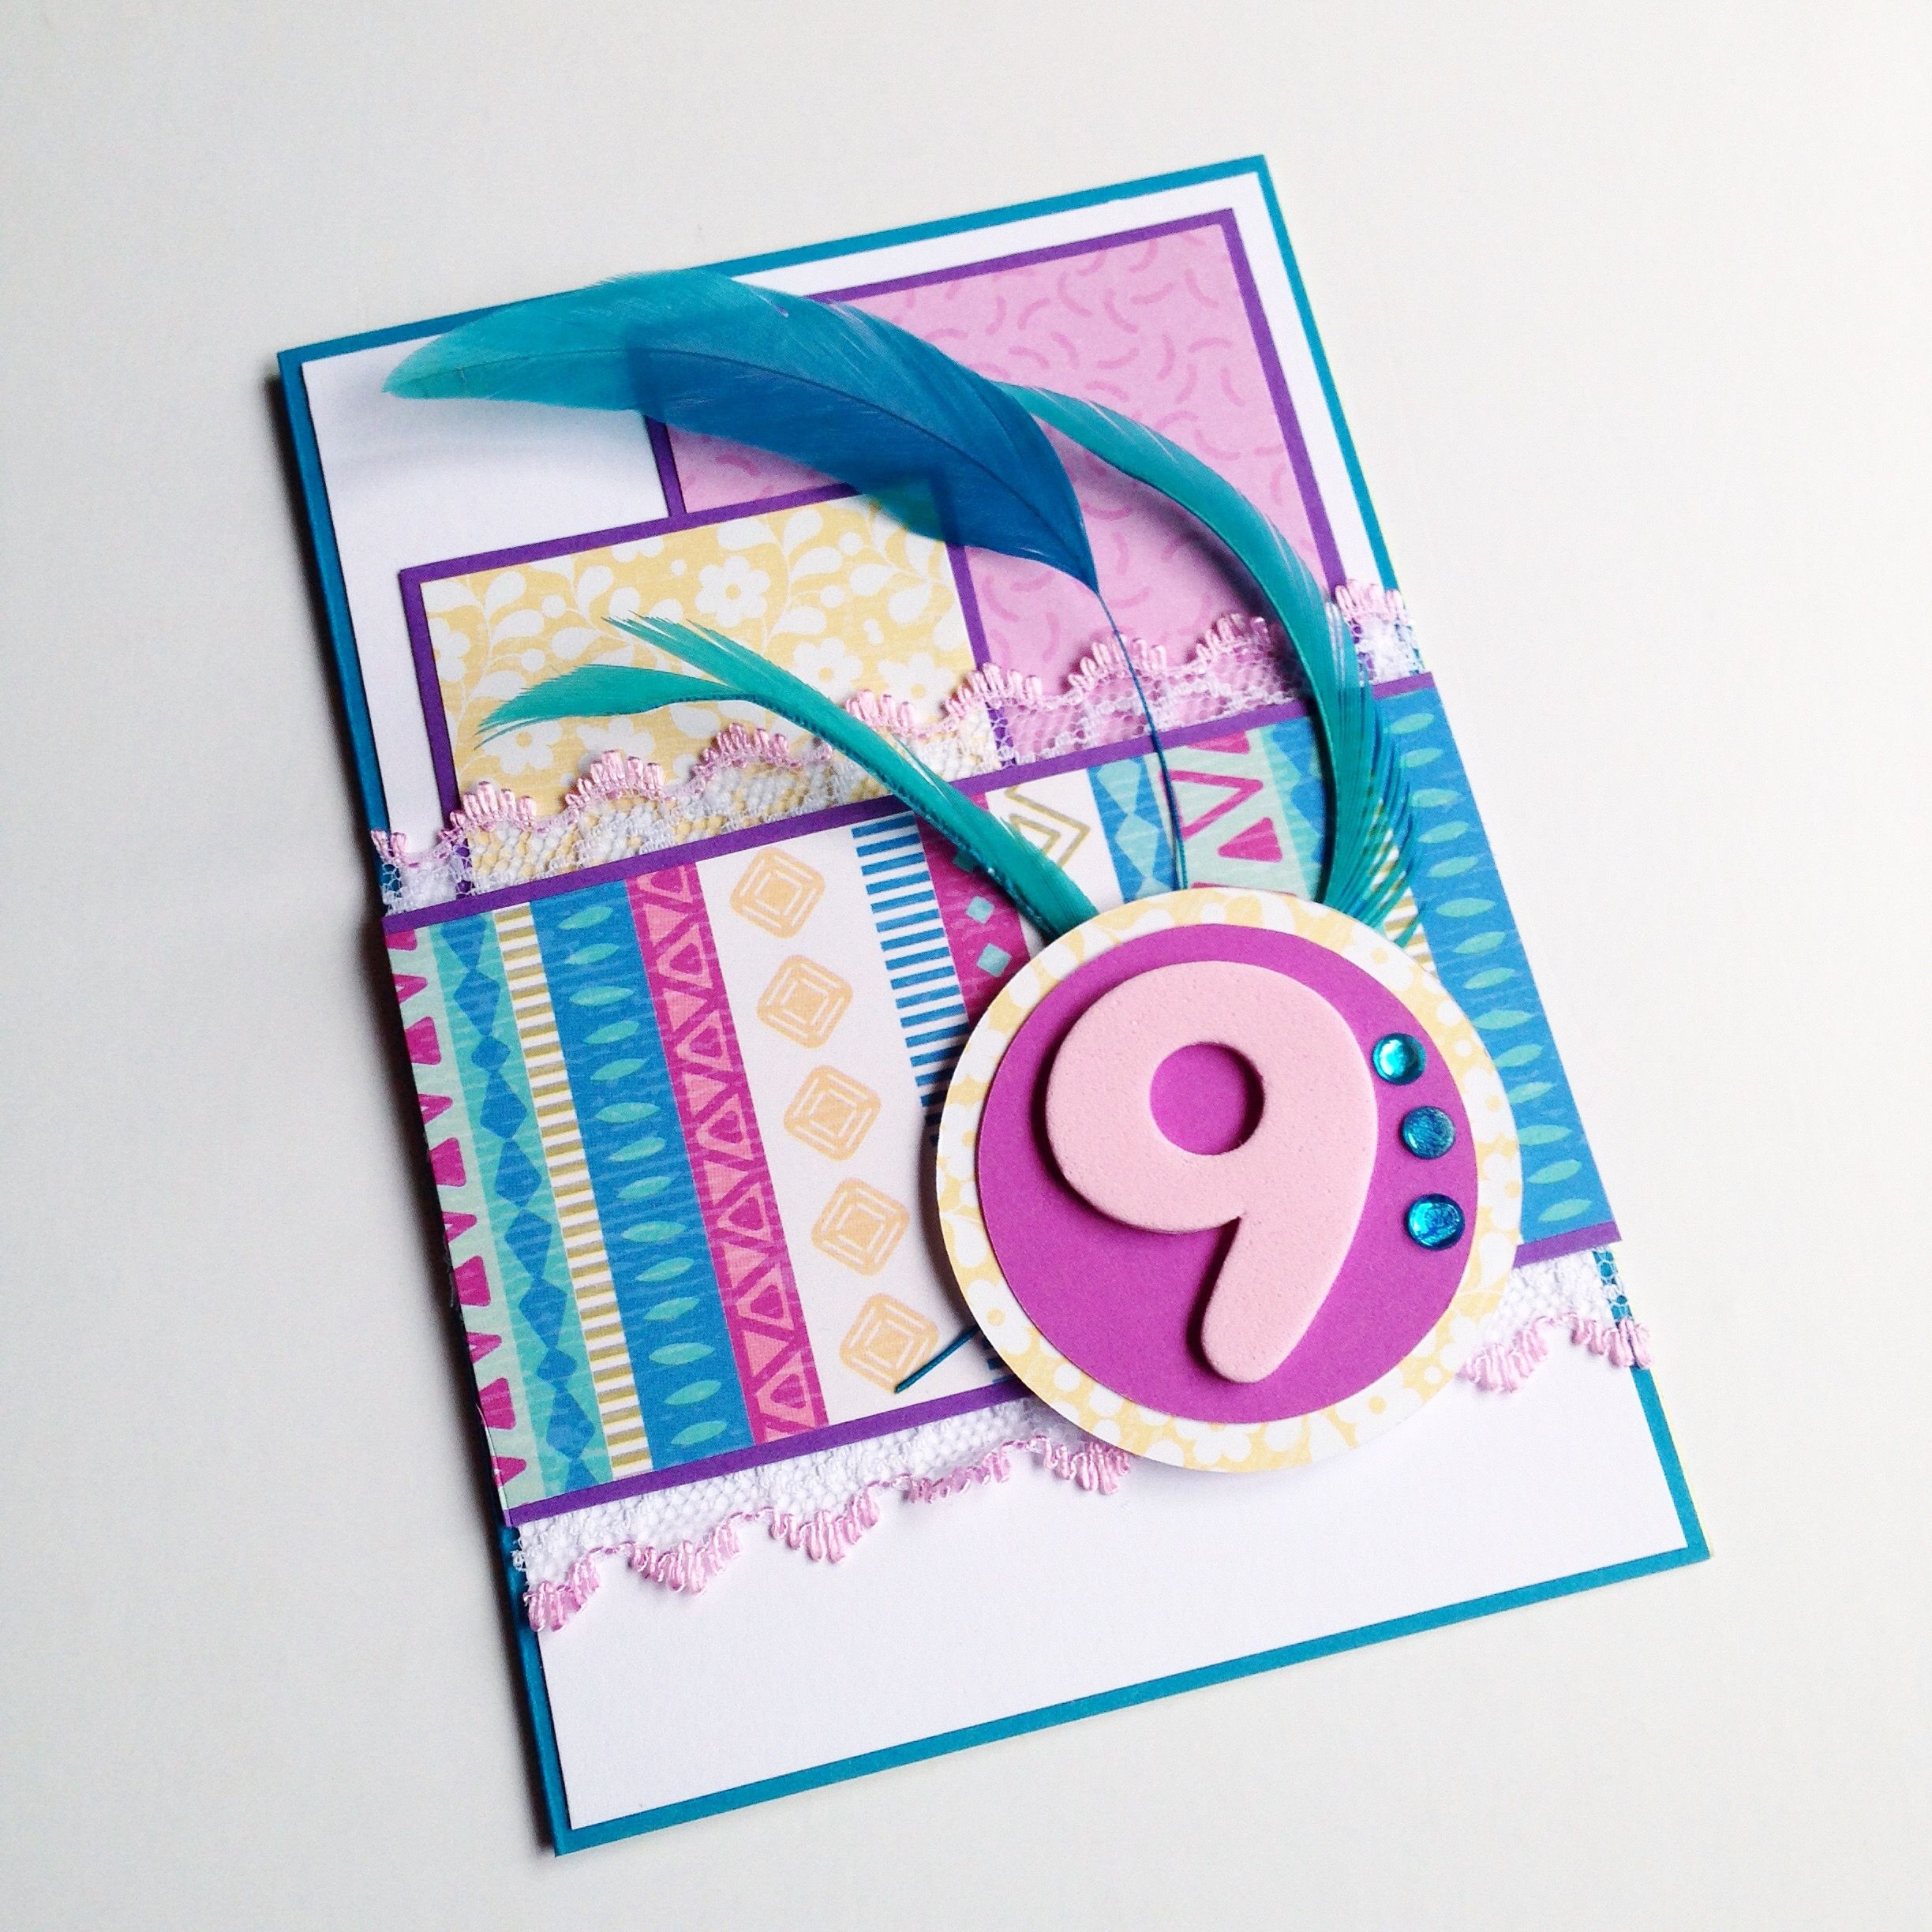 Birthday Gift Ideas For 9 Yr Old Girl
 Feathers and stripes birthday card for a 9 year old girl